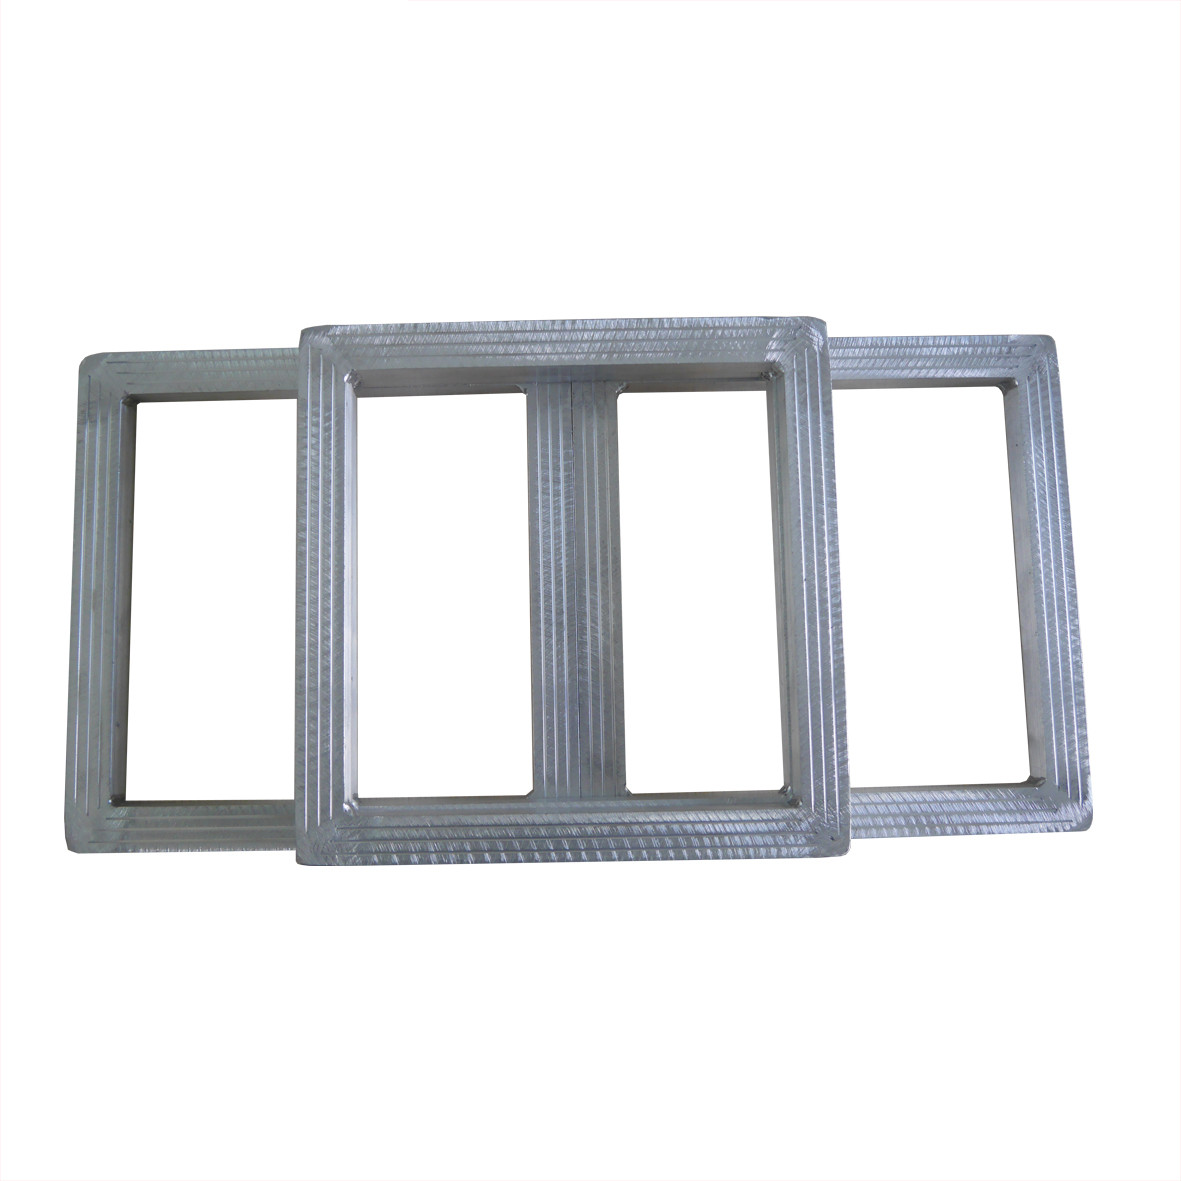 Comparison of wooden frames and  aluminum frames in the screen printing industry